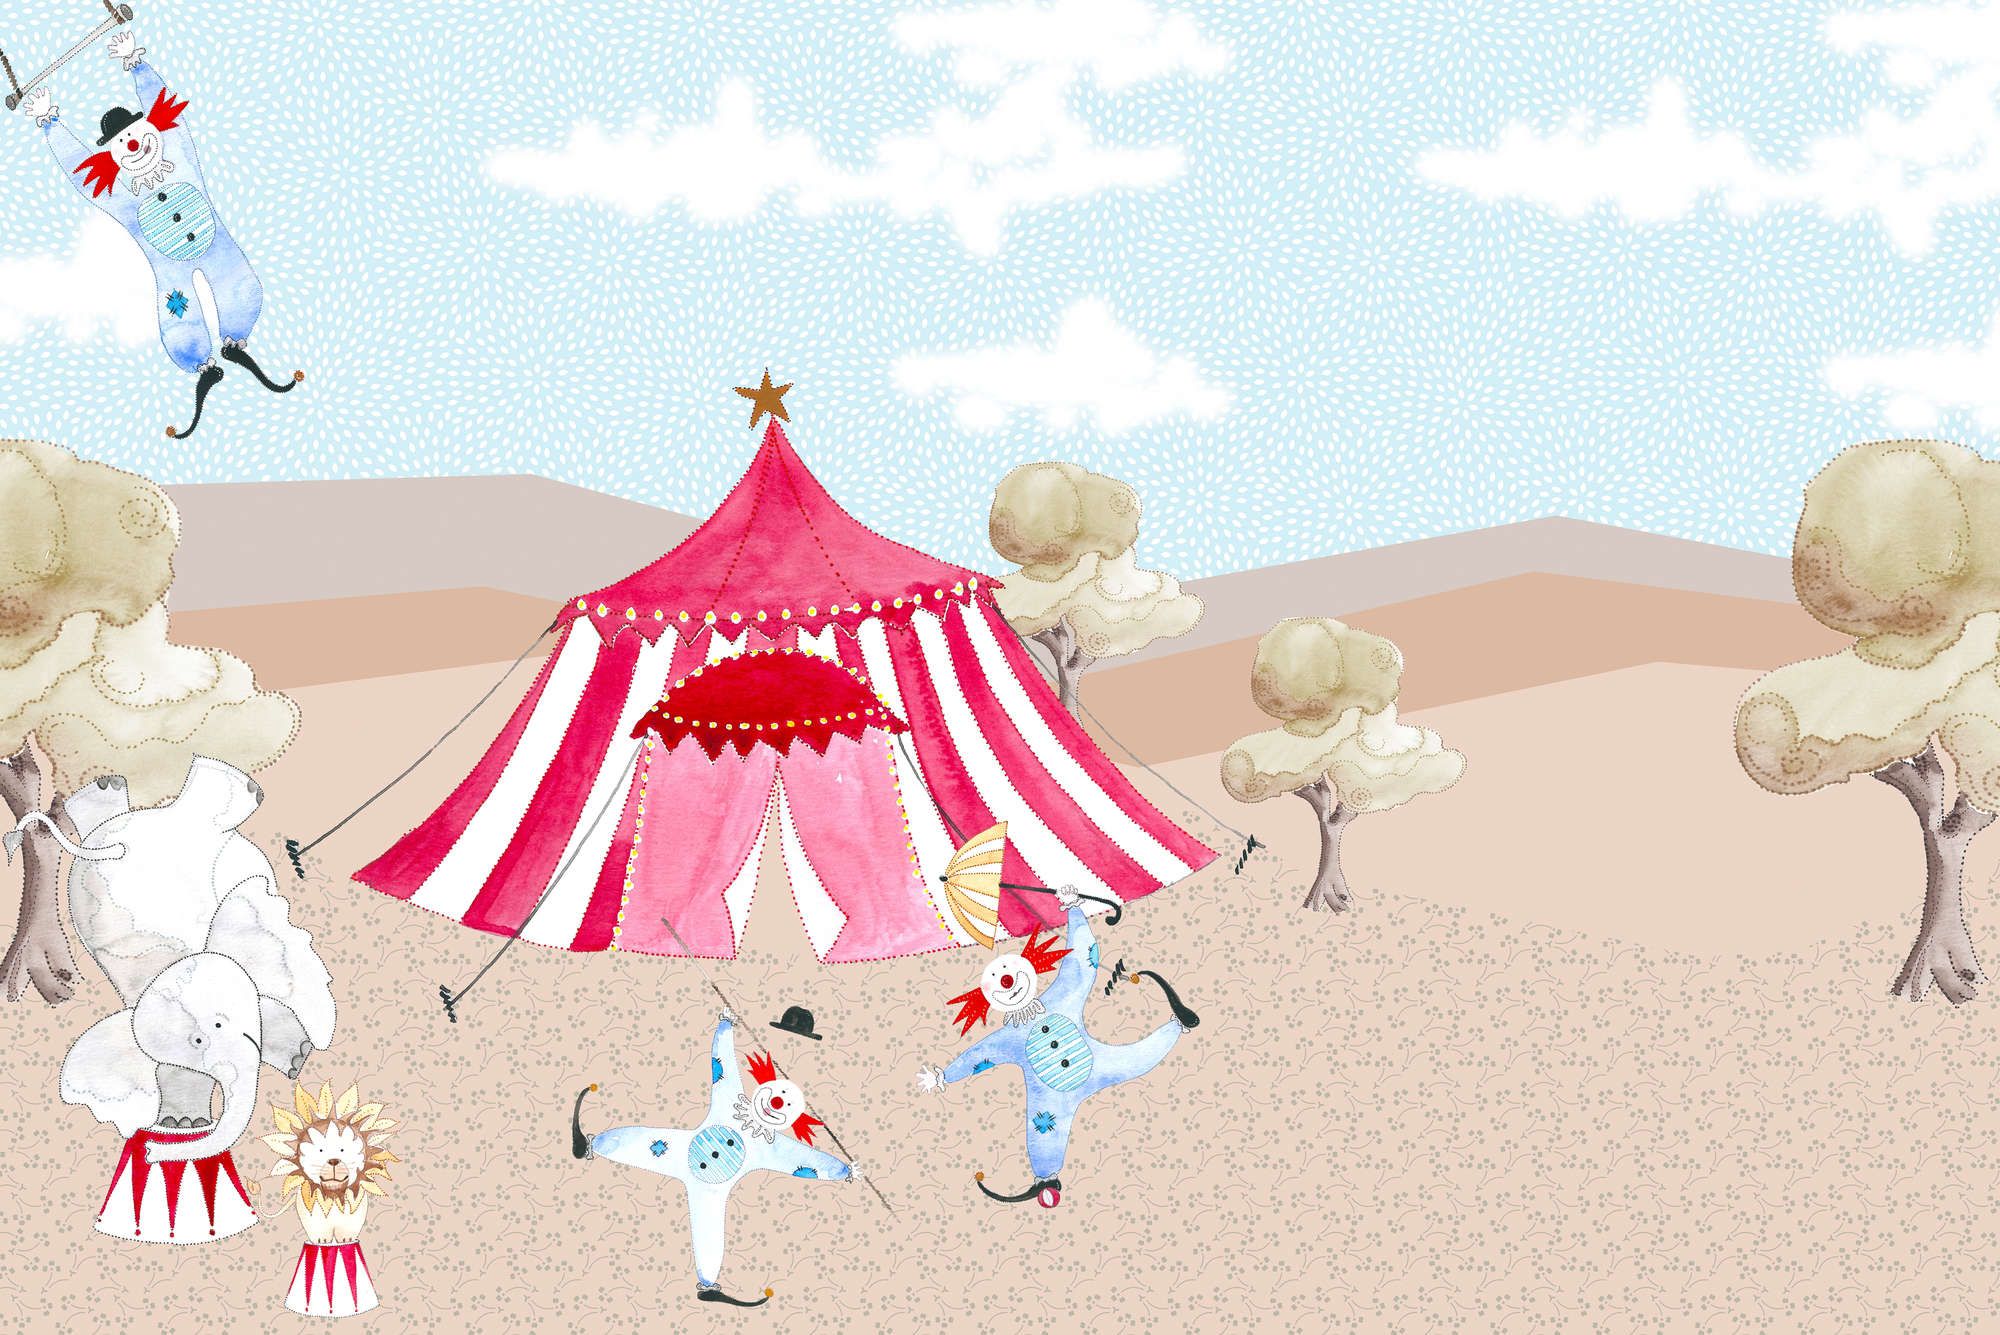             Children mural drawing circus tent with artists on matt smooth nonwoven
        